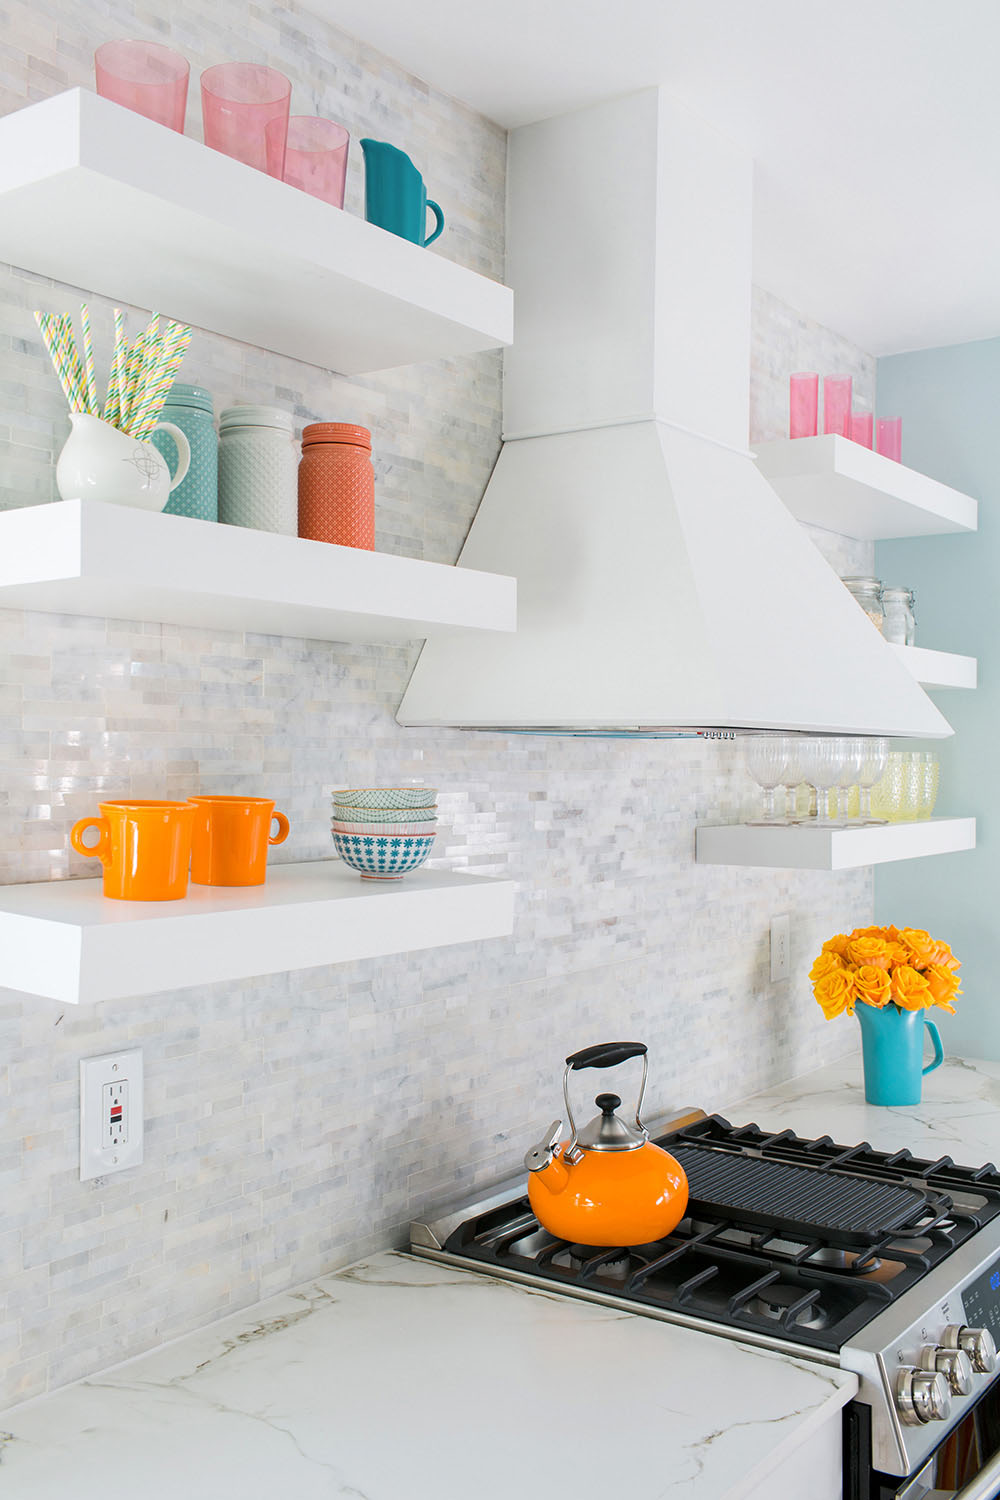 A kitchen stove with a white vent hood and white shelving with glassware and vases.